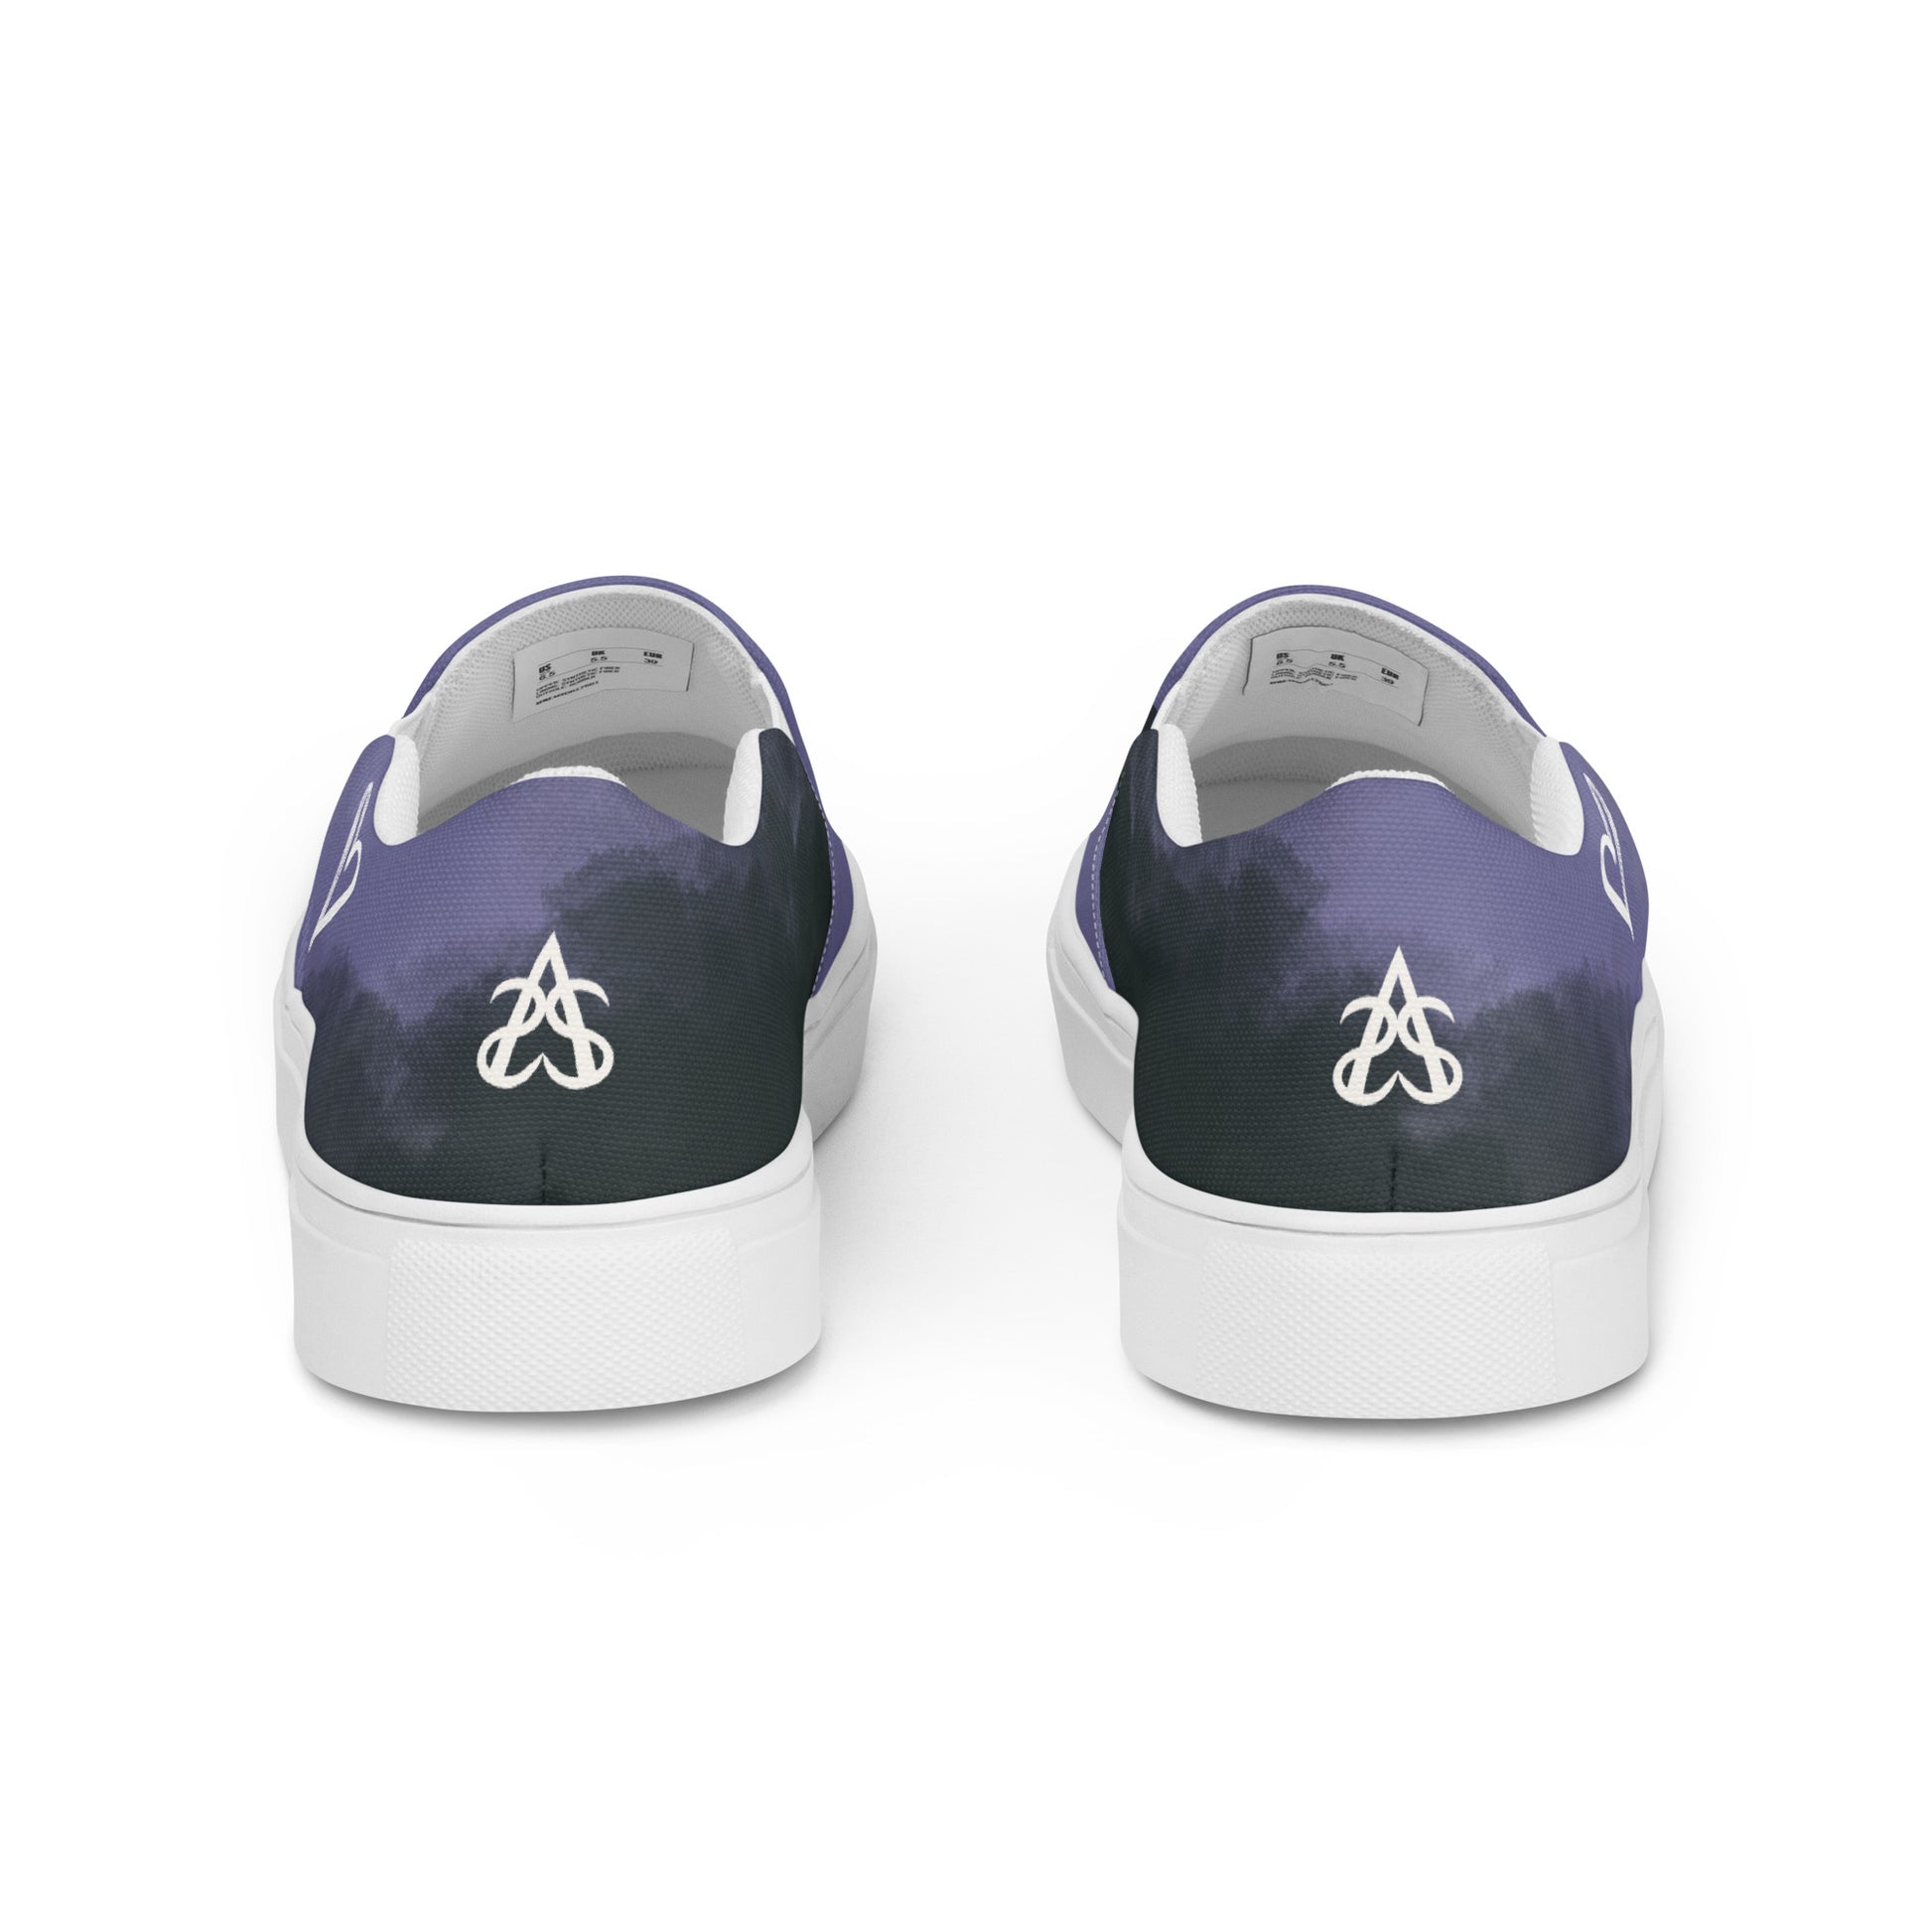 Back view: pair of slip-on shoes with the non-binary colors in wisps of clouds with a white hand drawn heart on the outside under the ankle and the Aras Sivad Studio logo in white on the back.